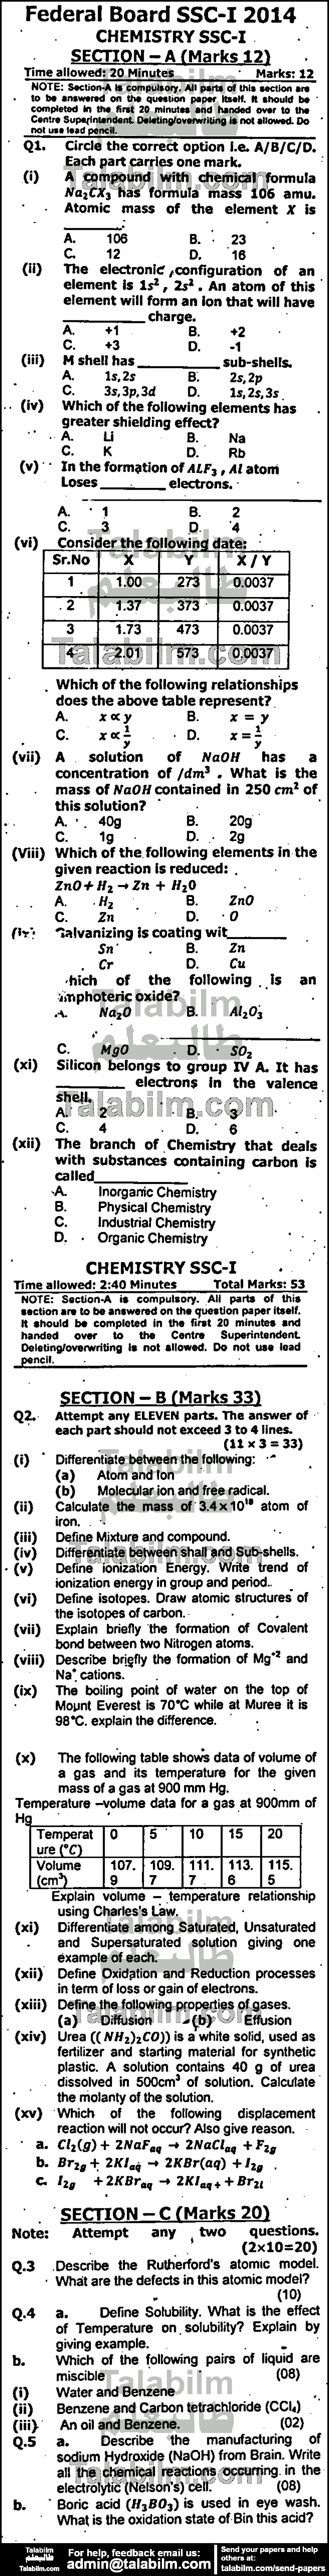 Chemistry 0 past paper for English Medium 2014 Group-I